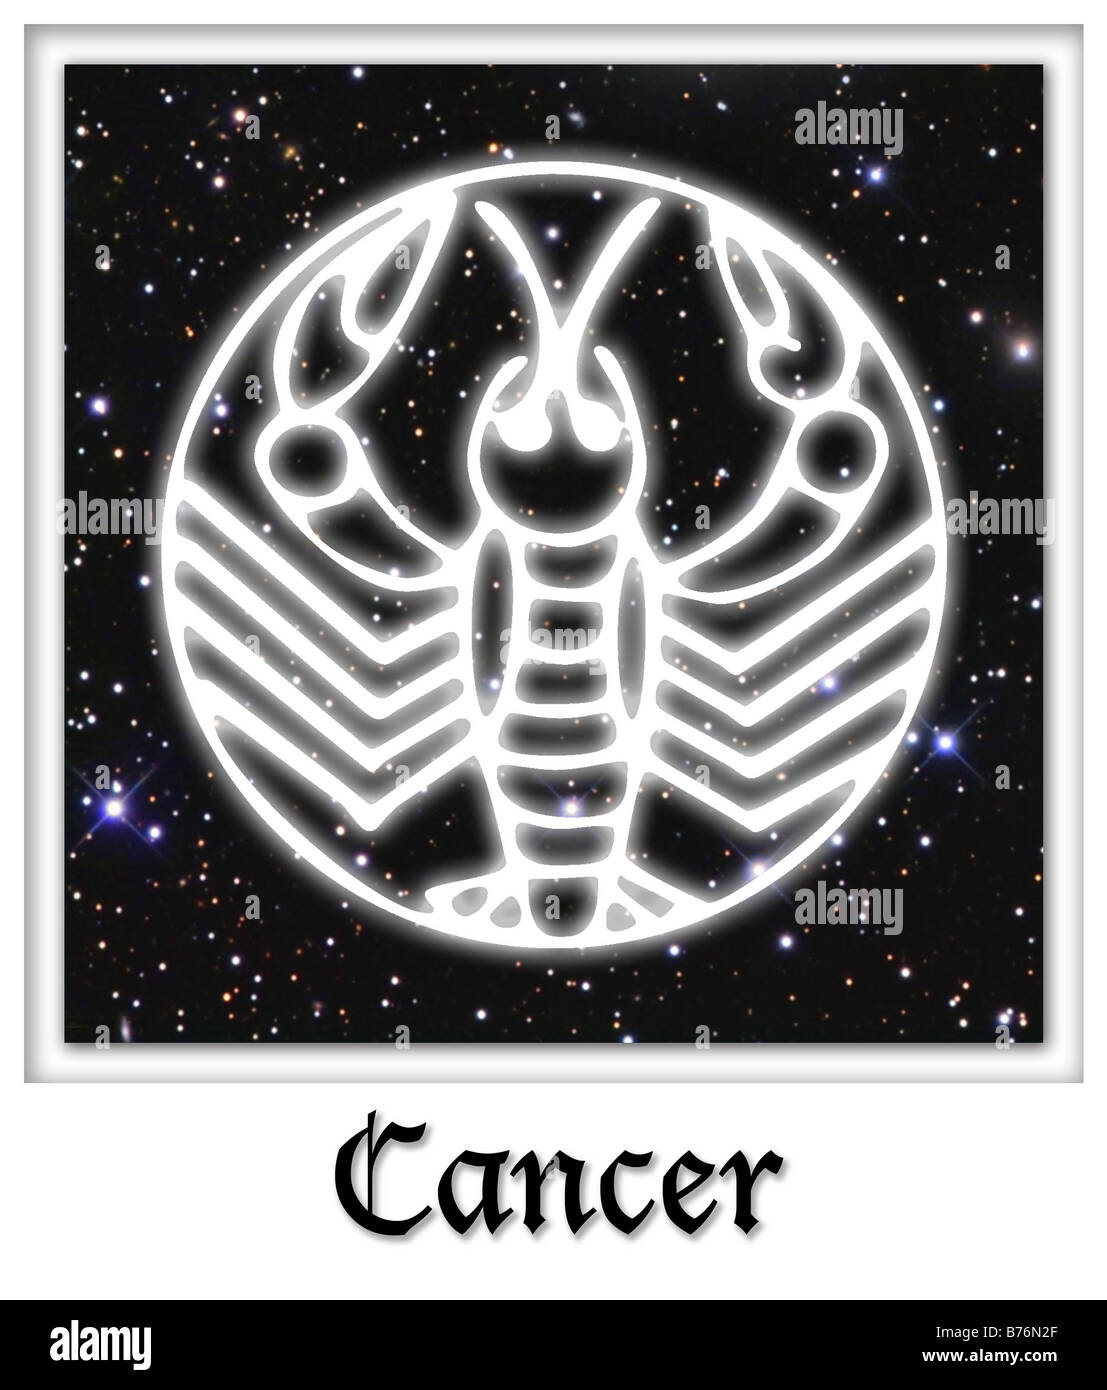 Cancer Astrological Astrology Horoscope Birth Sign Stock Photo